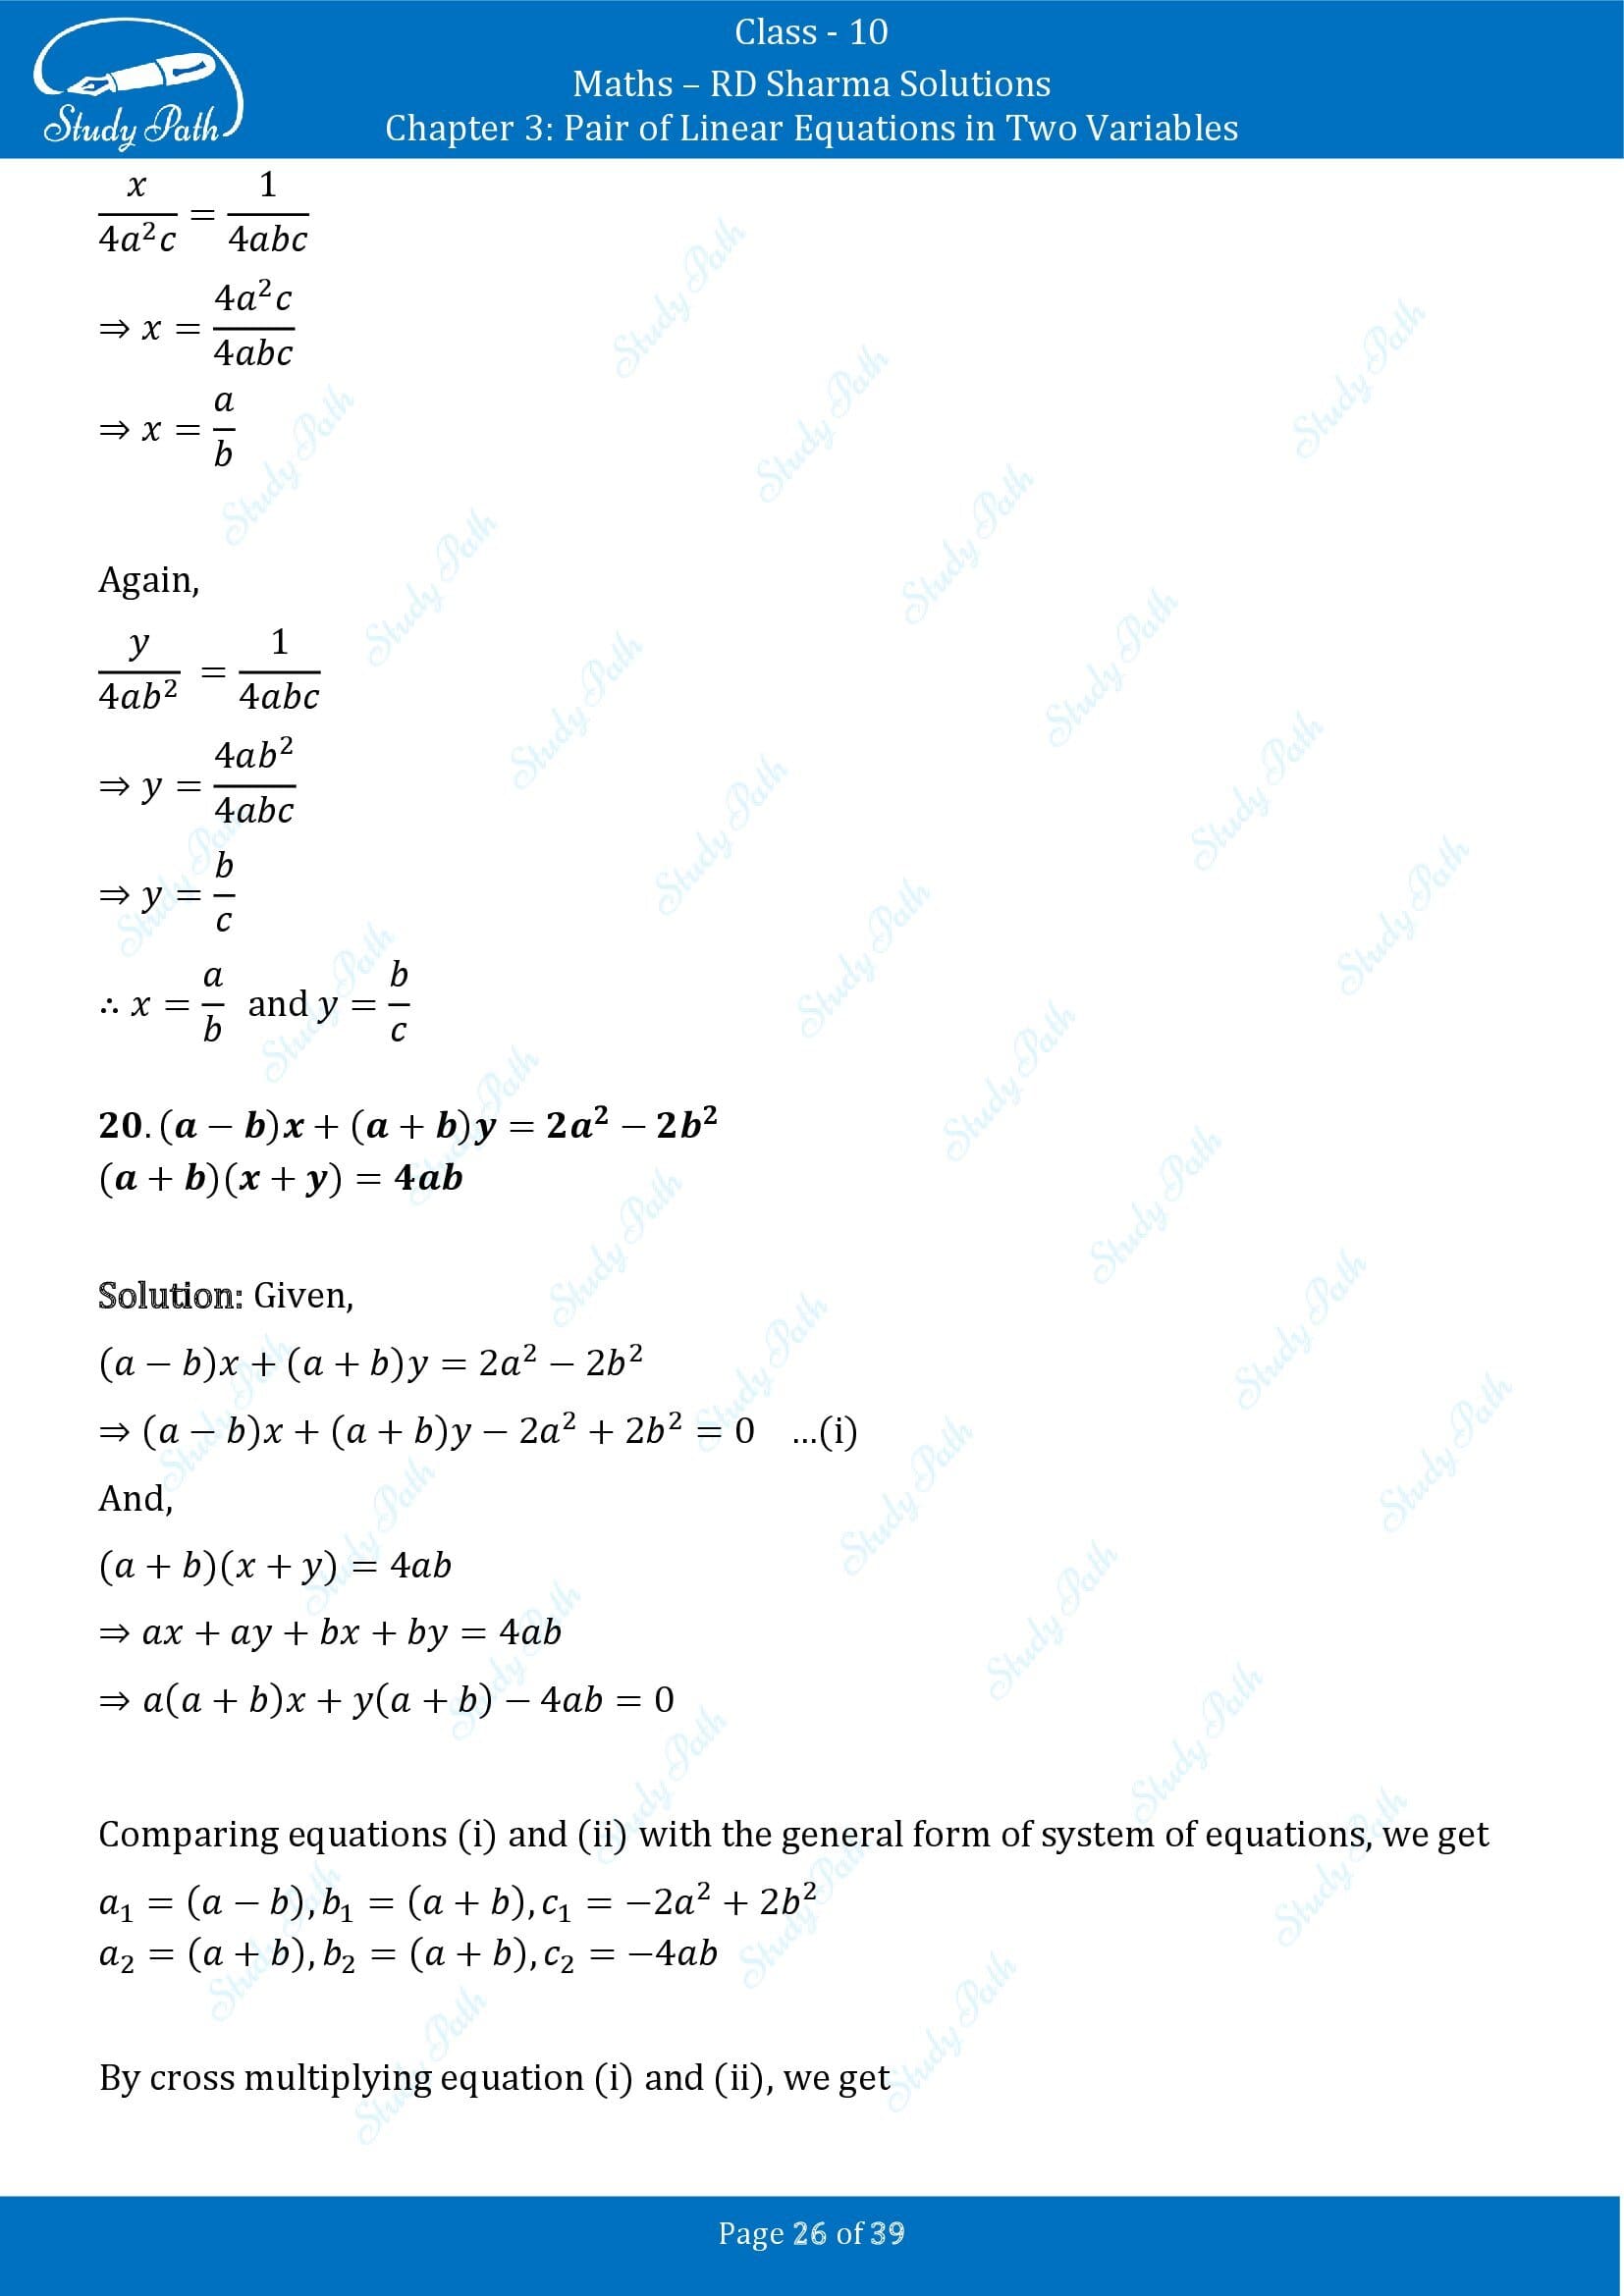 RD Sharma Solutions Class 10 Chapter 3 Pair of Linear Equations in Two Variables Exercise 3.4 00026